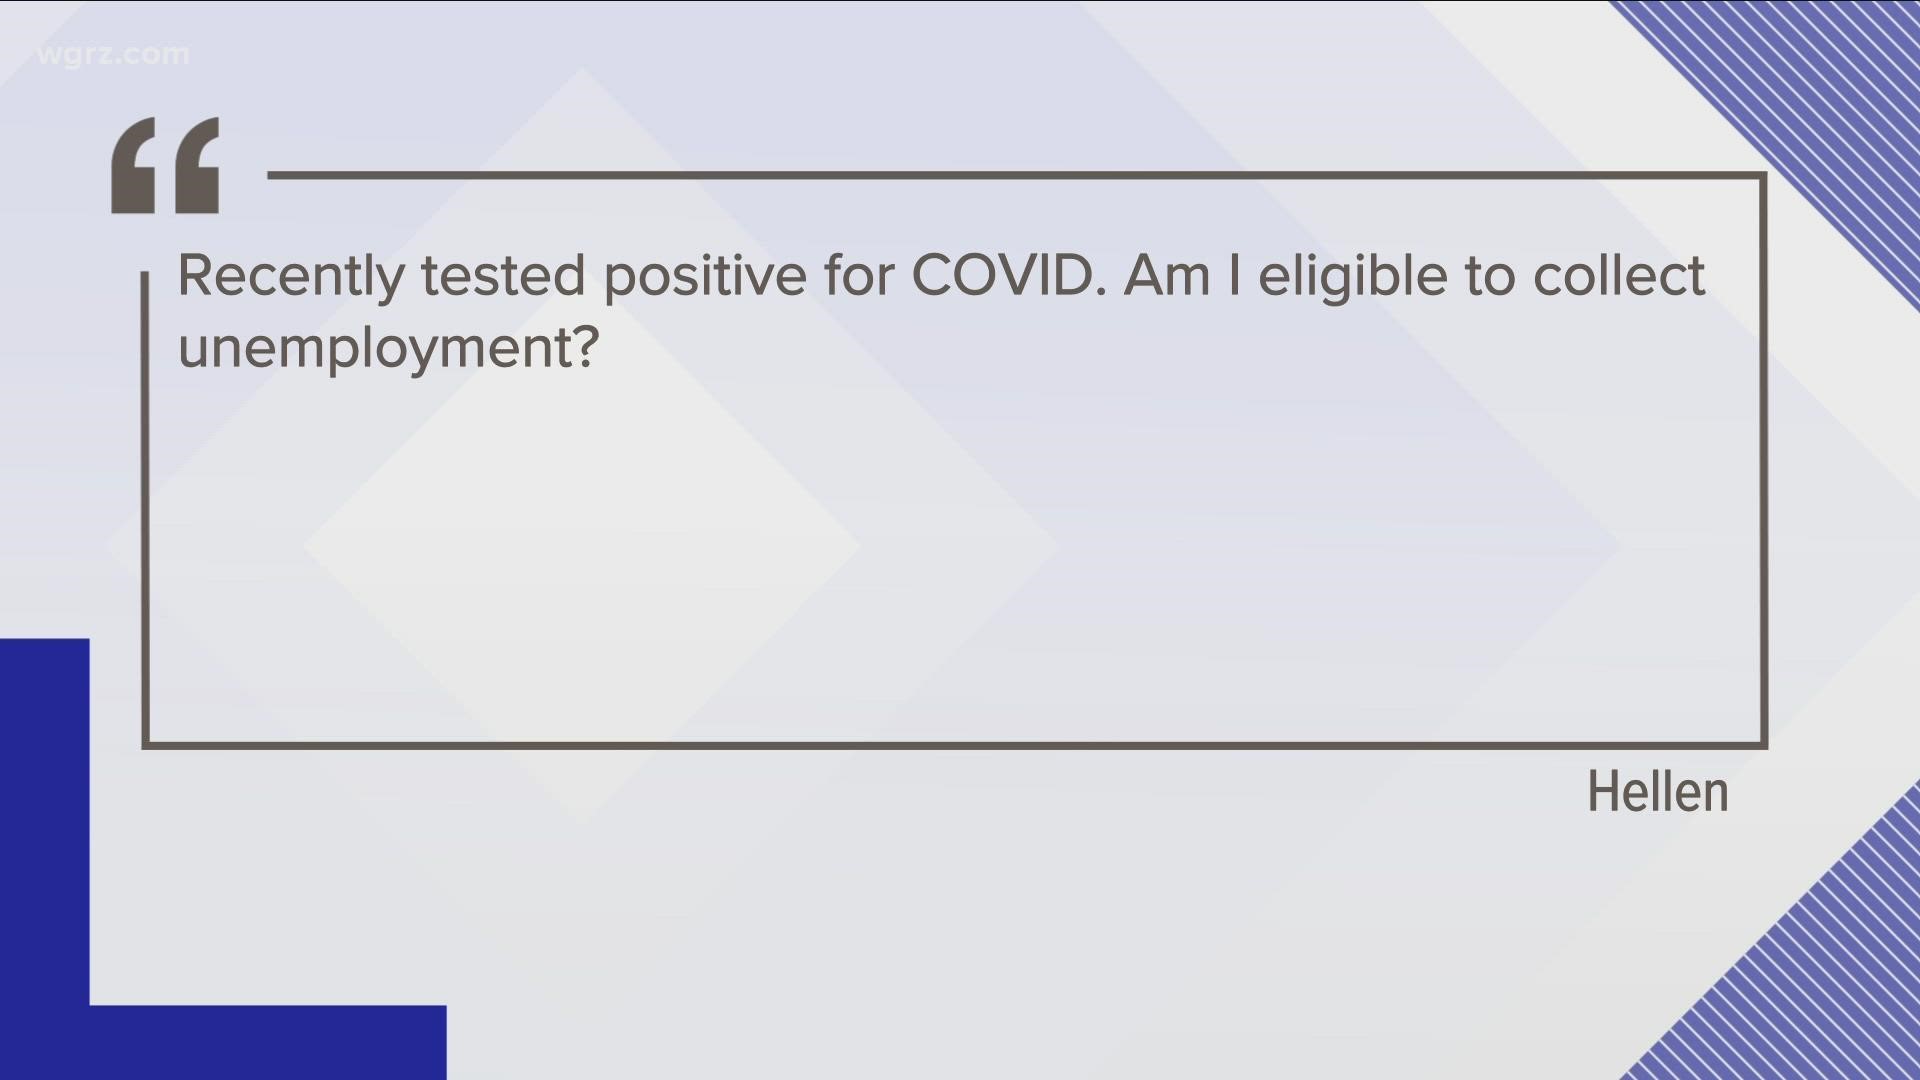 A 2 On Your Side viewer wanted to know if they could collect unemployment benefits while staying home with COVID.